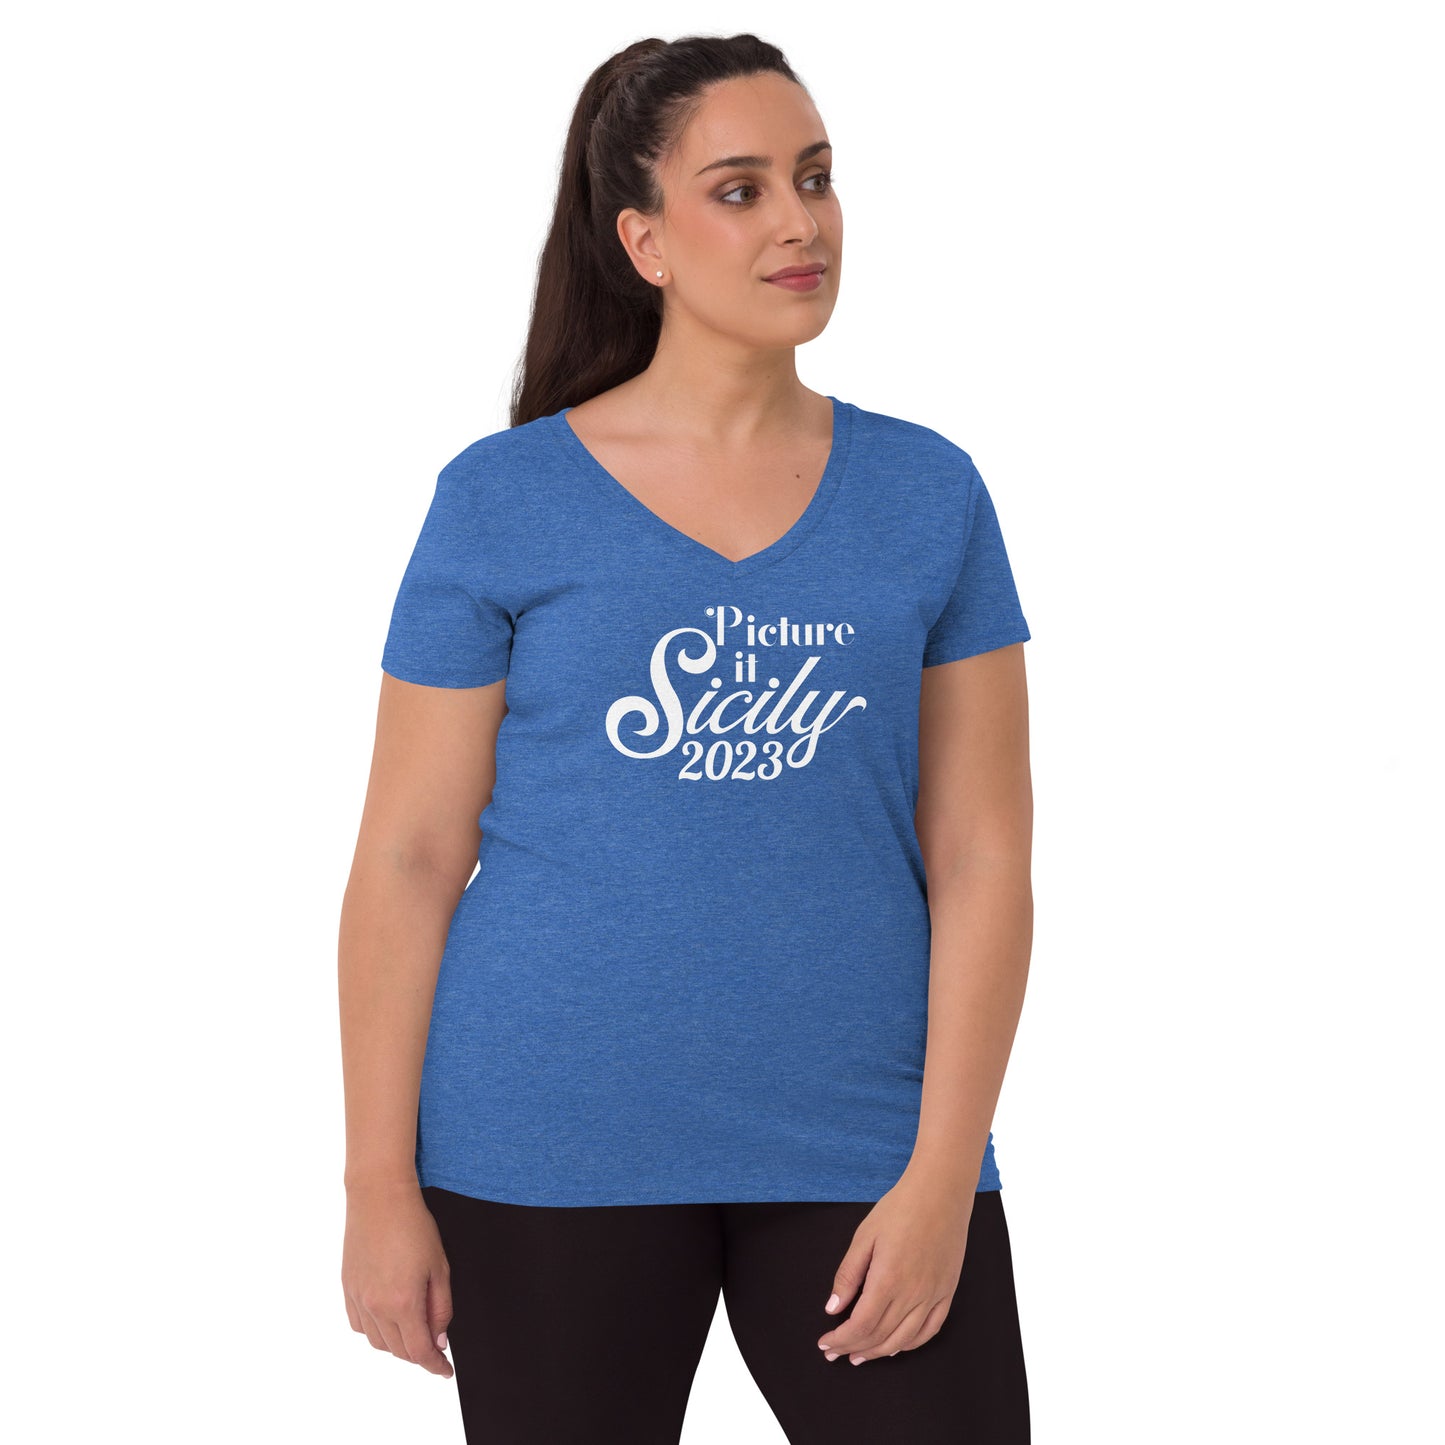 Picture It. Sicily, 2023 -  Women’s V-Neck Cruise T-Shirt